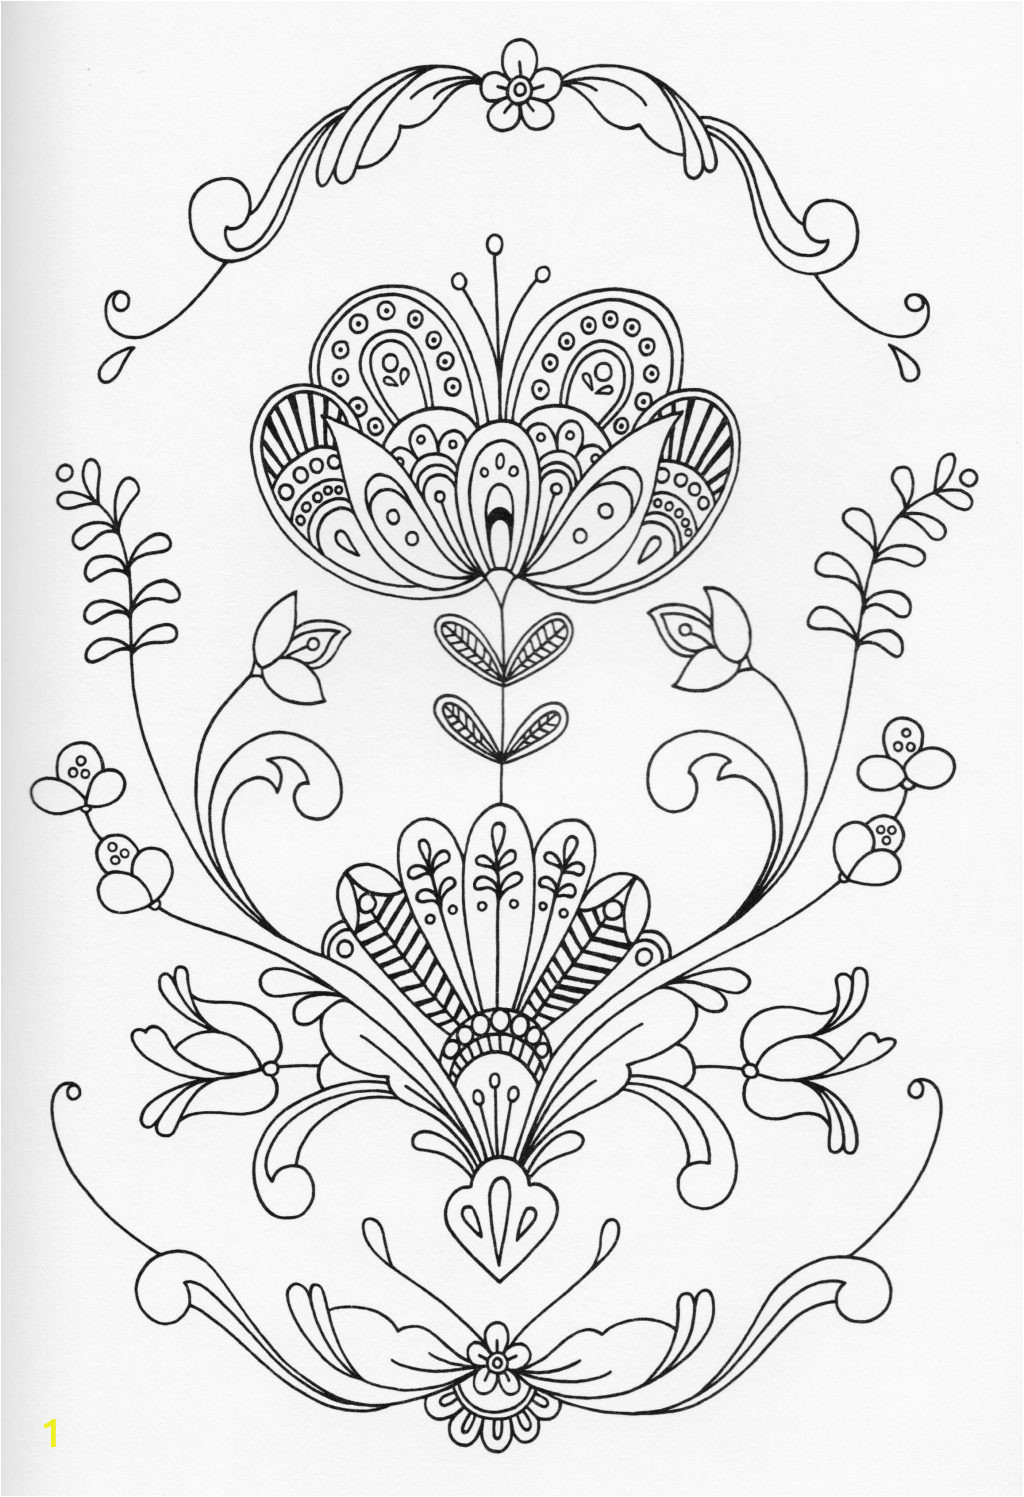 Johanna Basford Coloring Pages Coloring Pages Prodigal son Coloring Page Johanna Basford